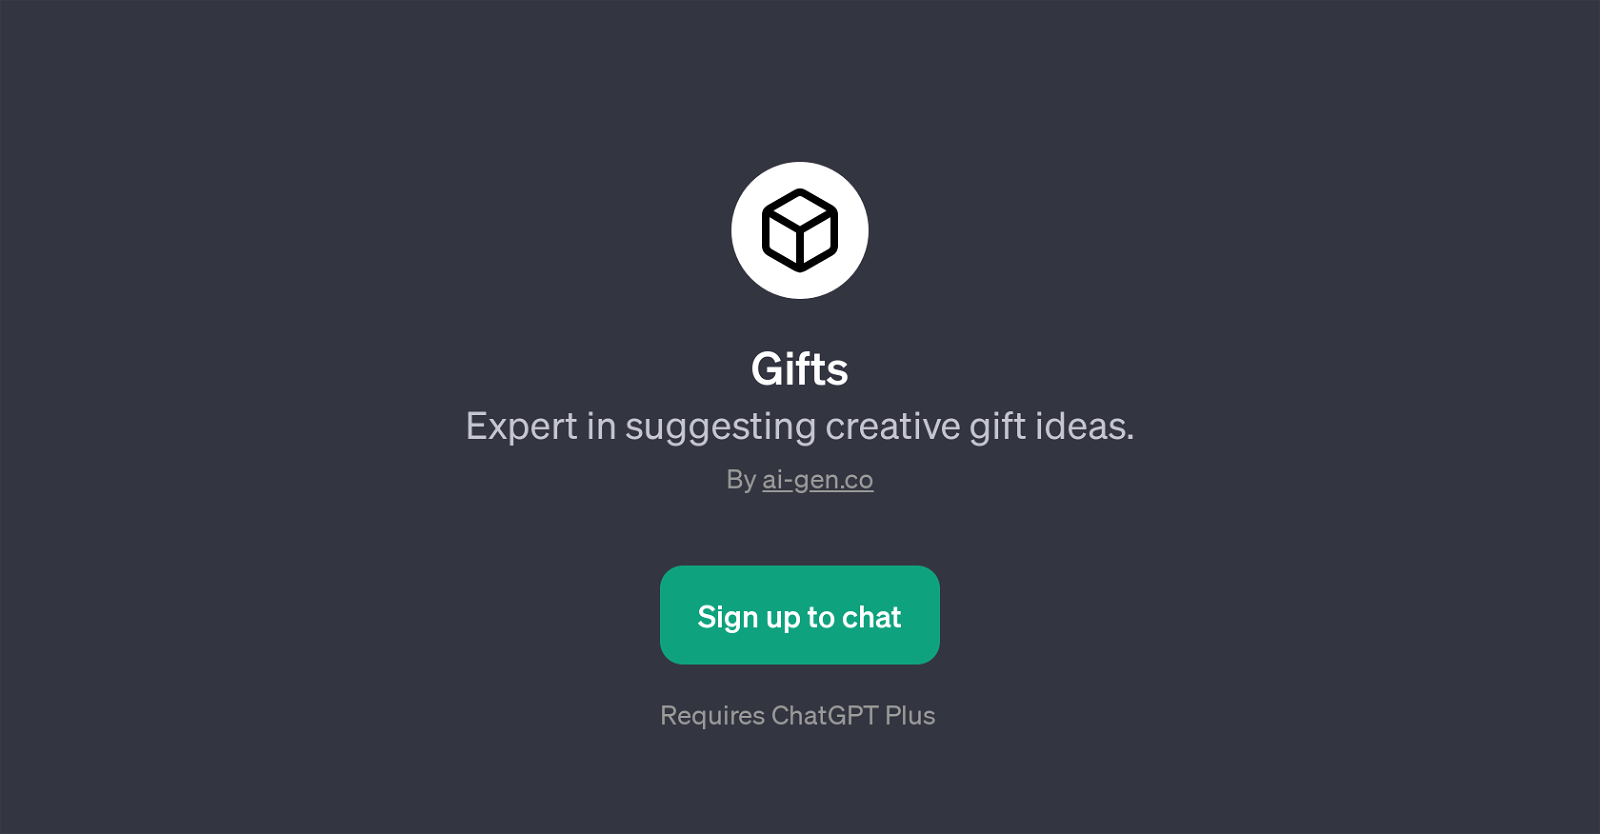 Gifts website